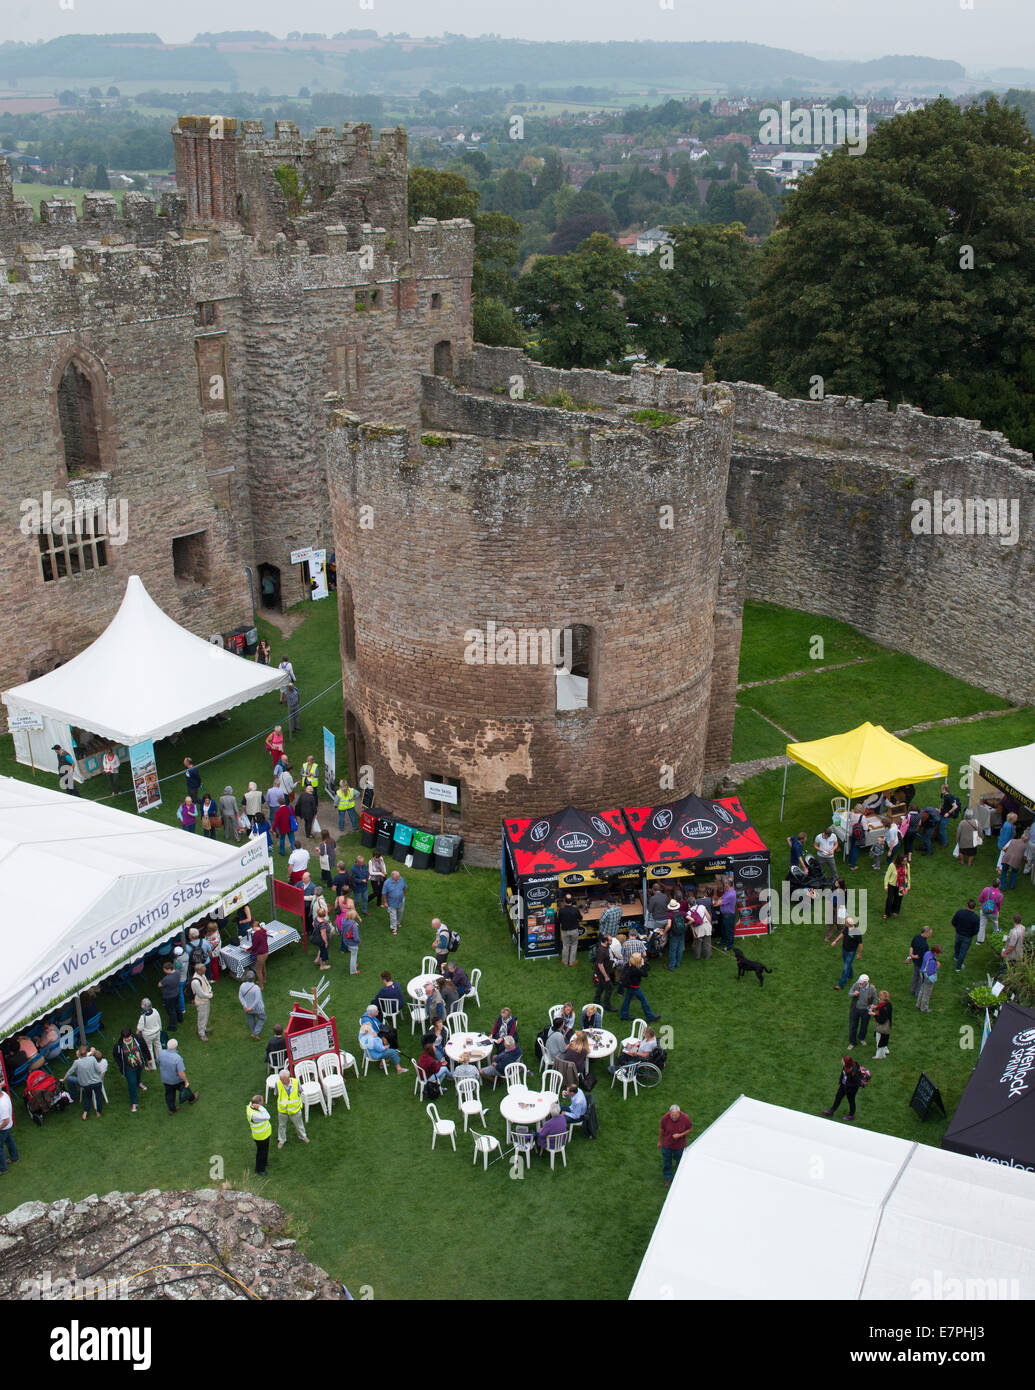 The 2014 Ludlow Food Festival held in Ludlow Castle grounds, Shropshire, England, Friday 12th September. Stock Photo